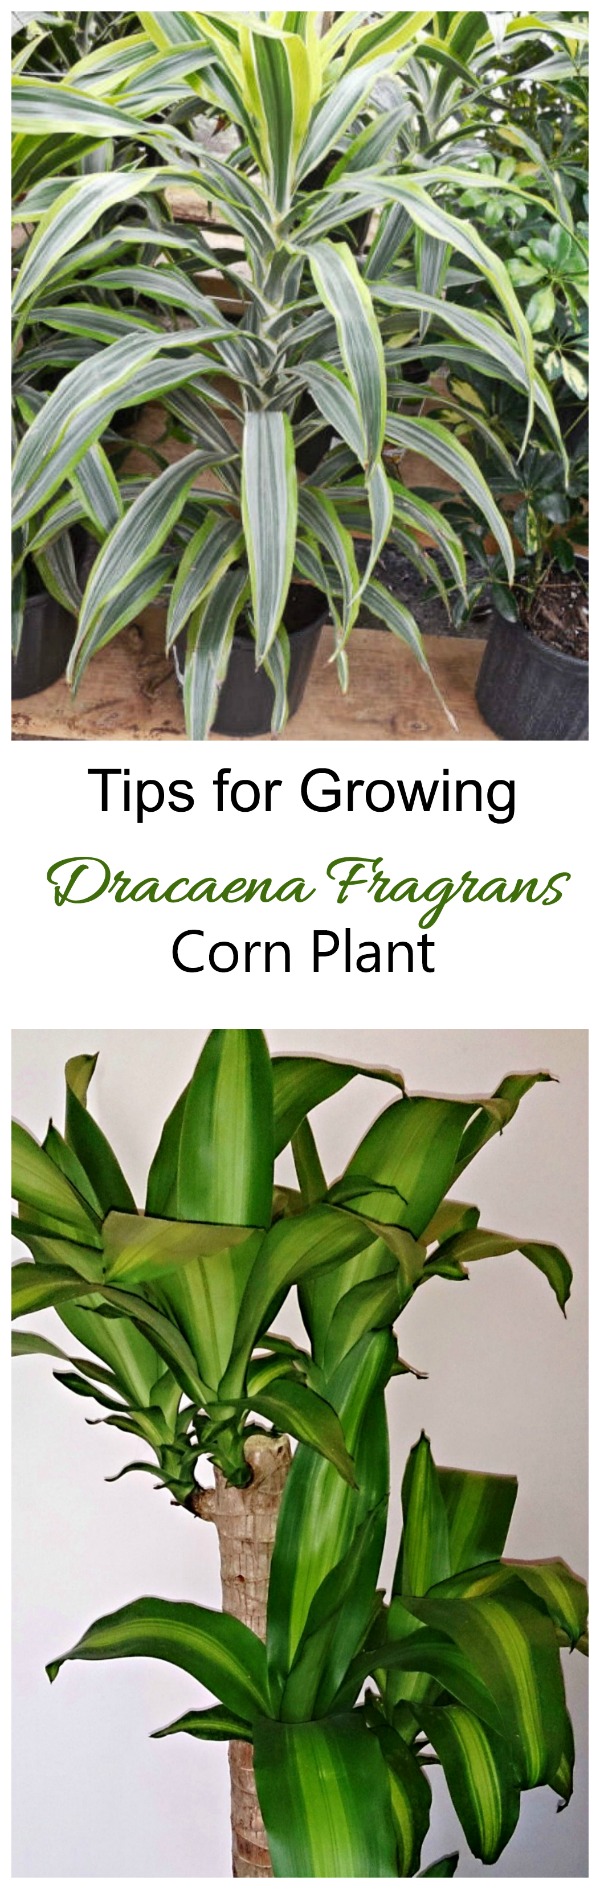 These tips for growing dracaena fragrans show how easy this house plant is to manage. #dracaenafragrans #cornplants